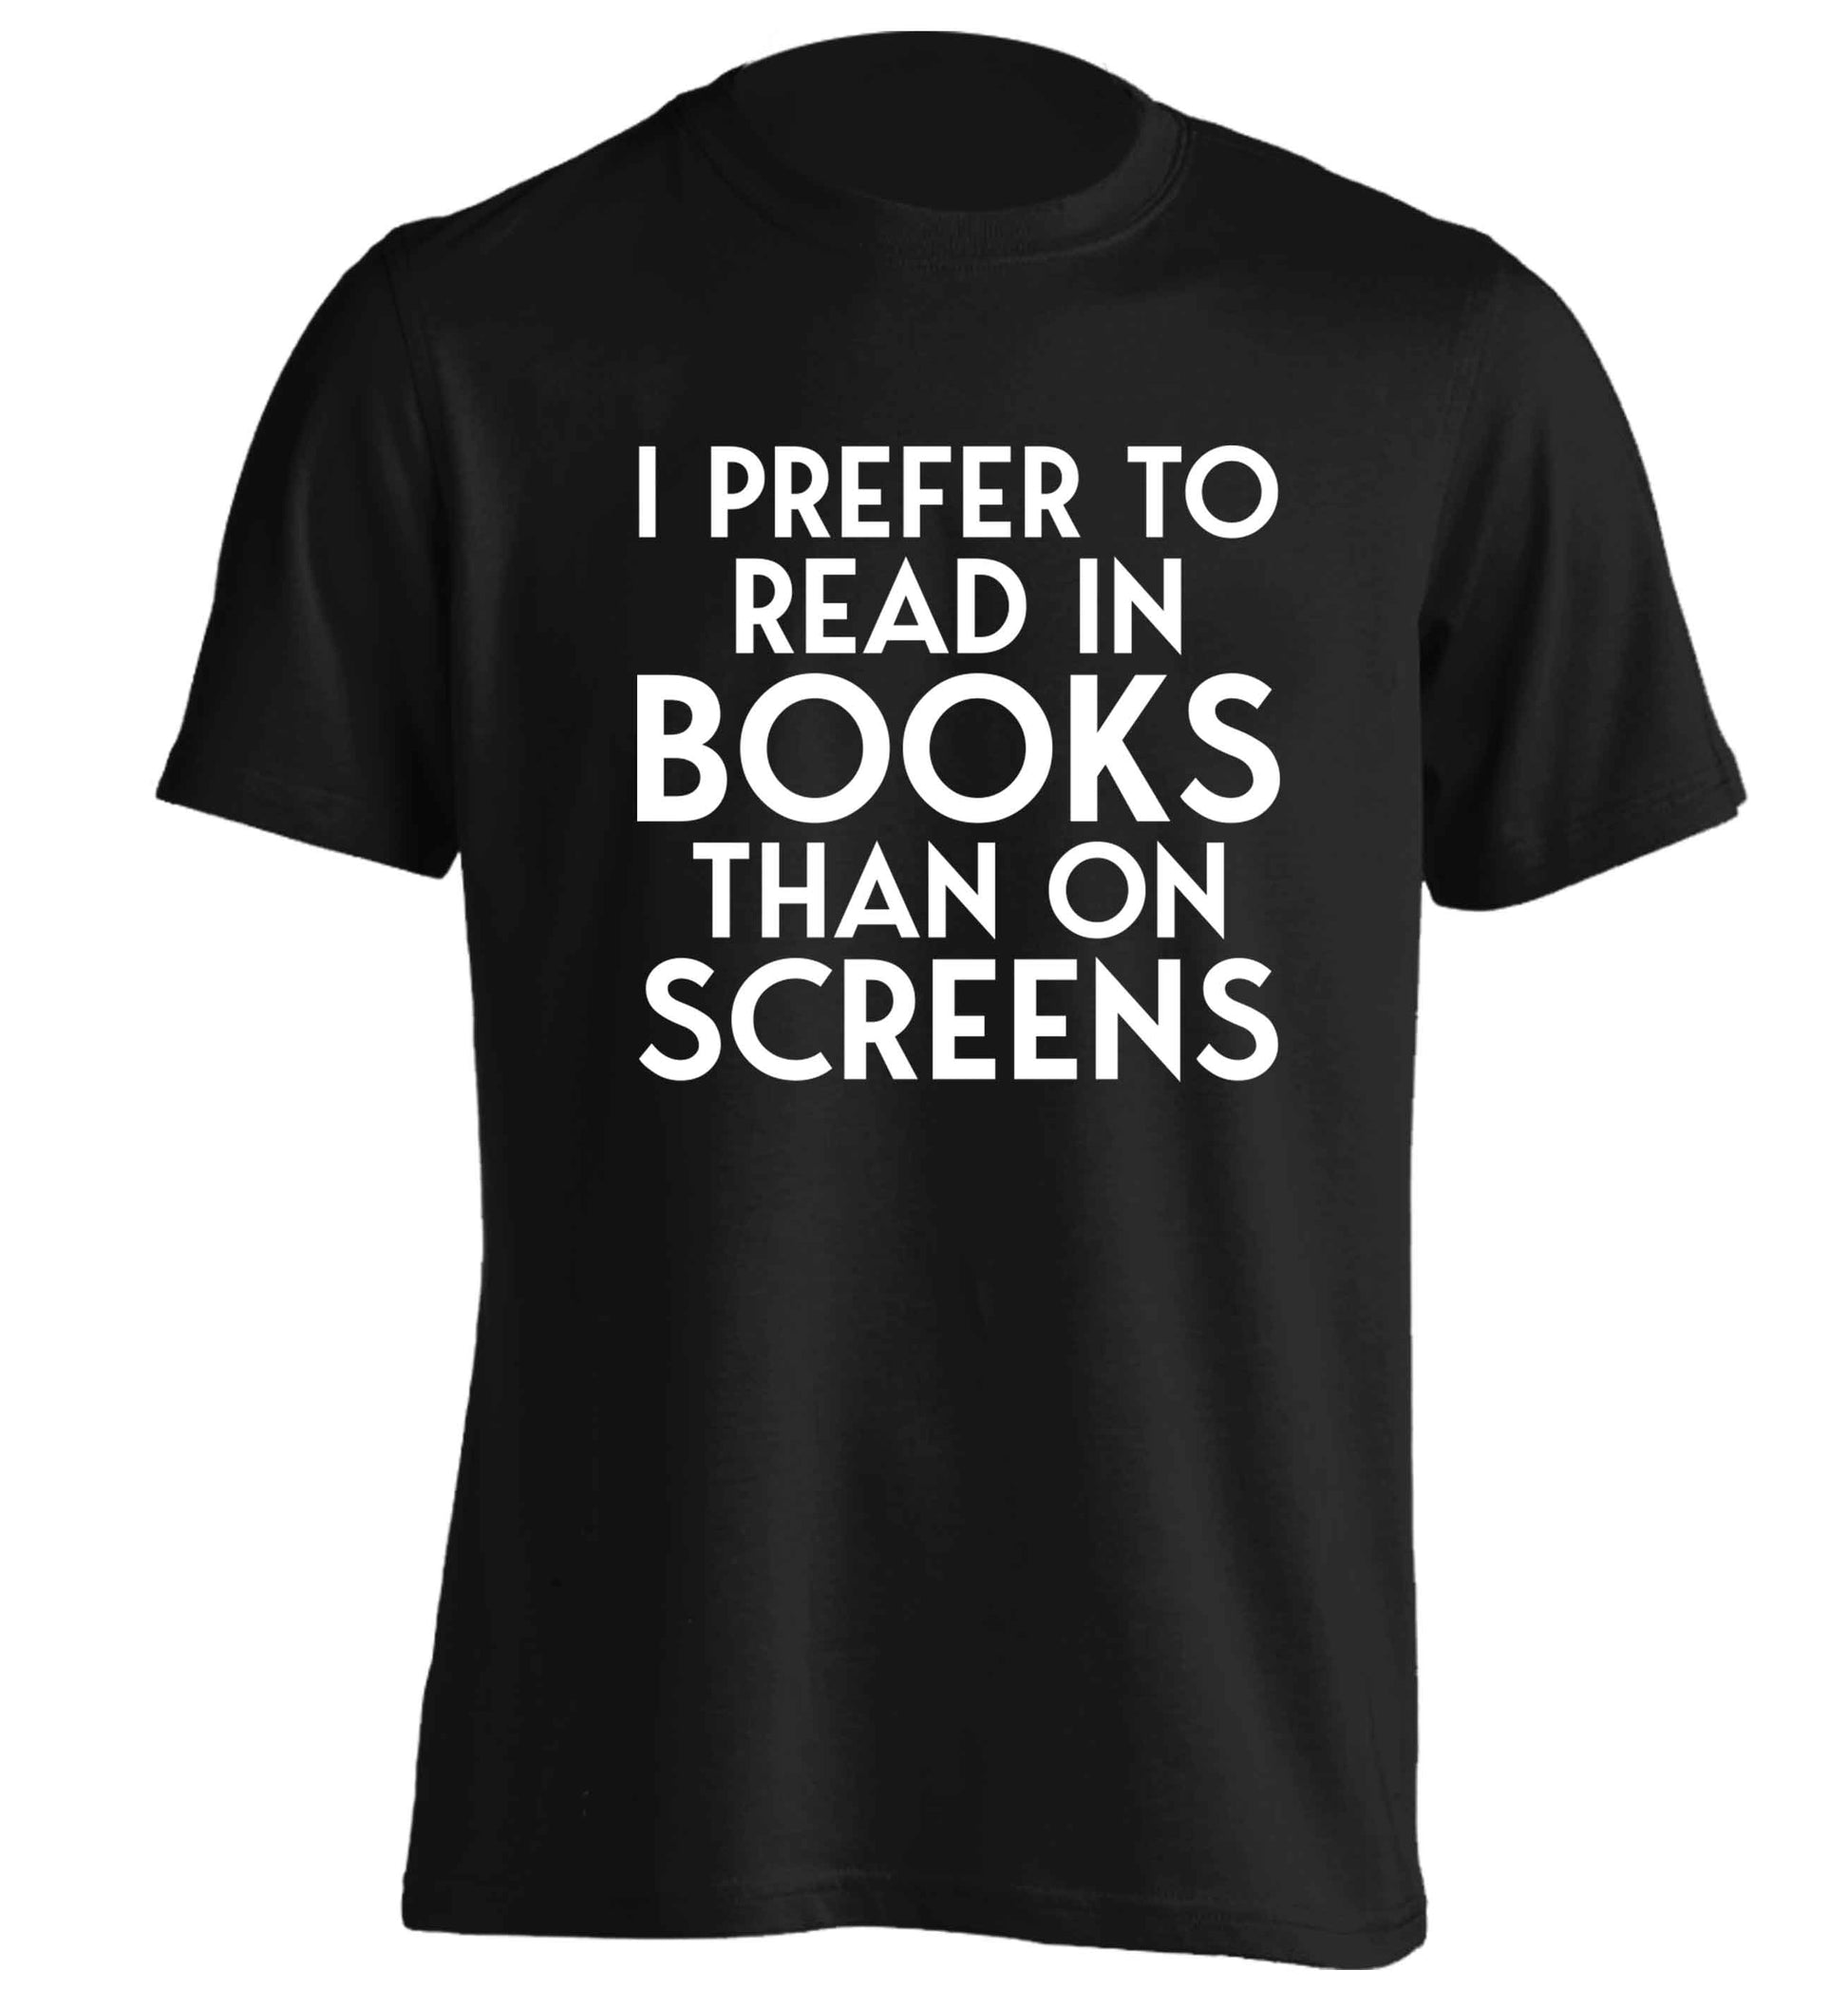 I prefer to read in books than on screens adults unisex black Tshirt 2XL